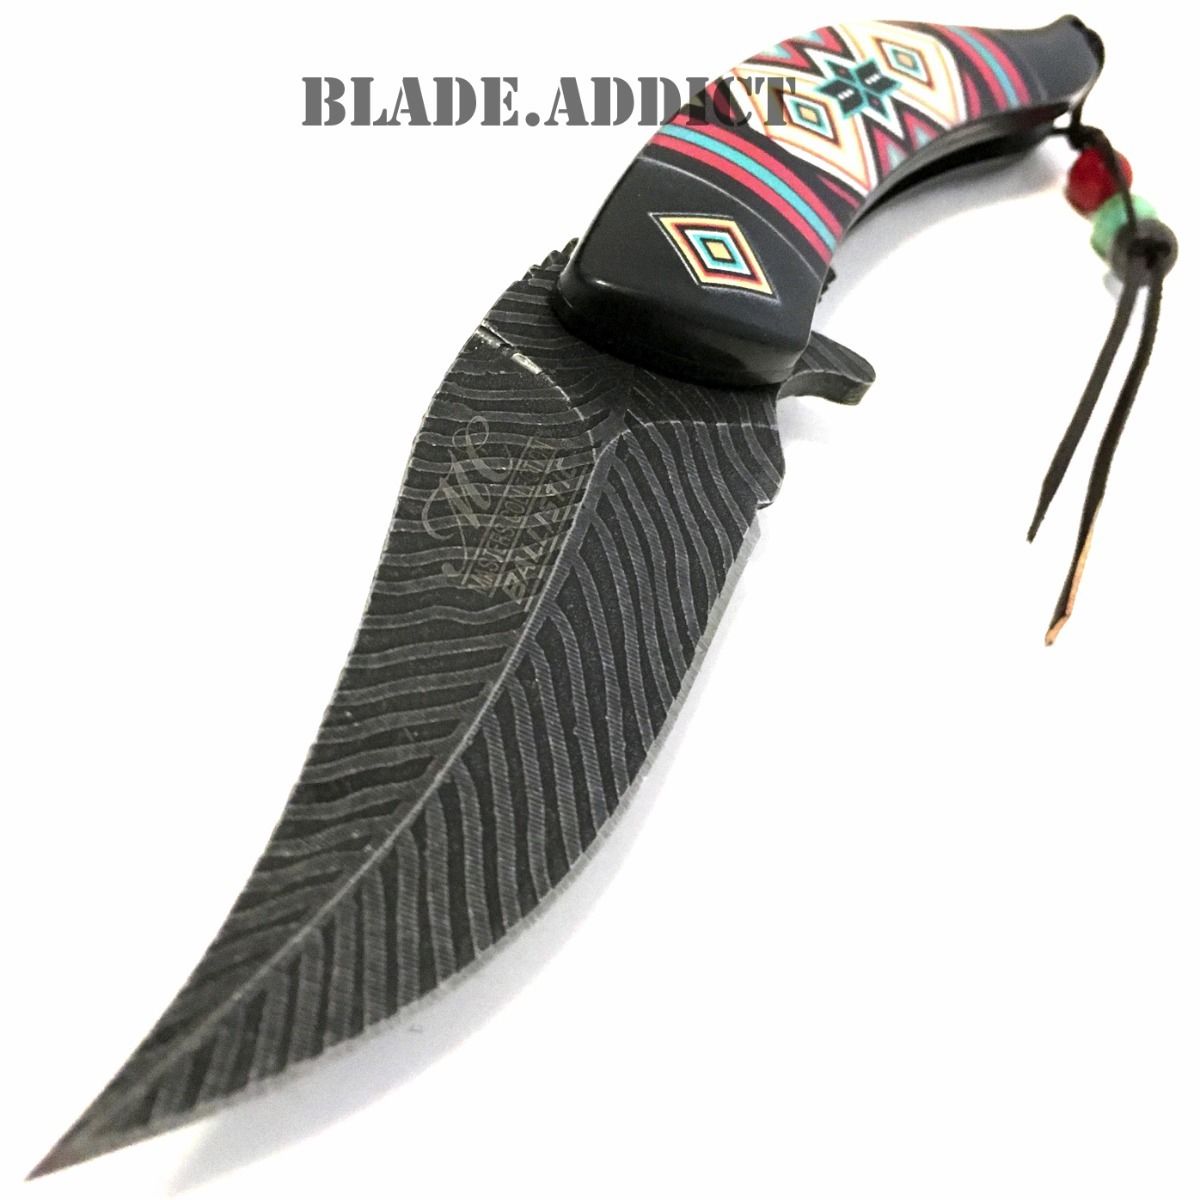 8.5" Native American Indian Spring Assisted Open Pocket Knife Damascus Feather BK